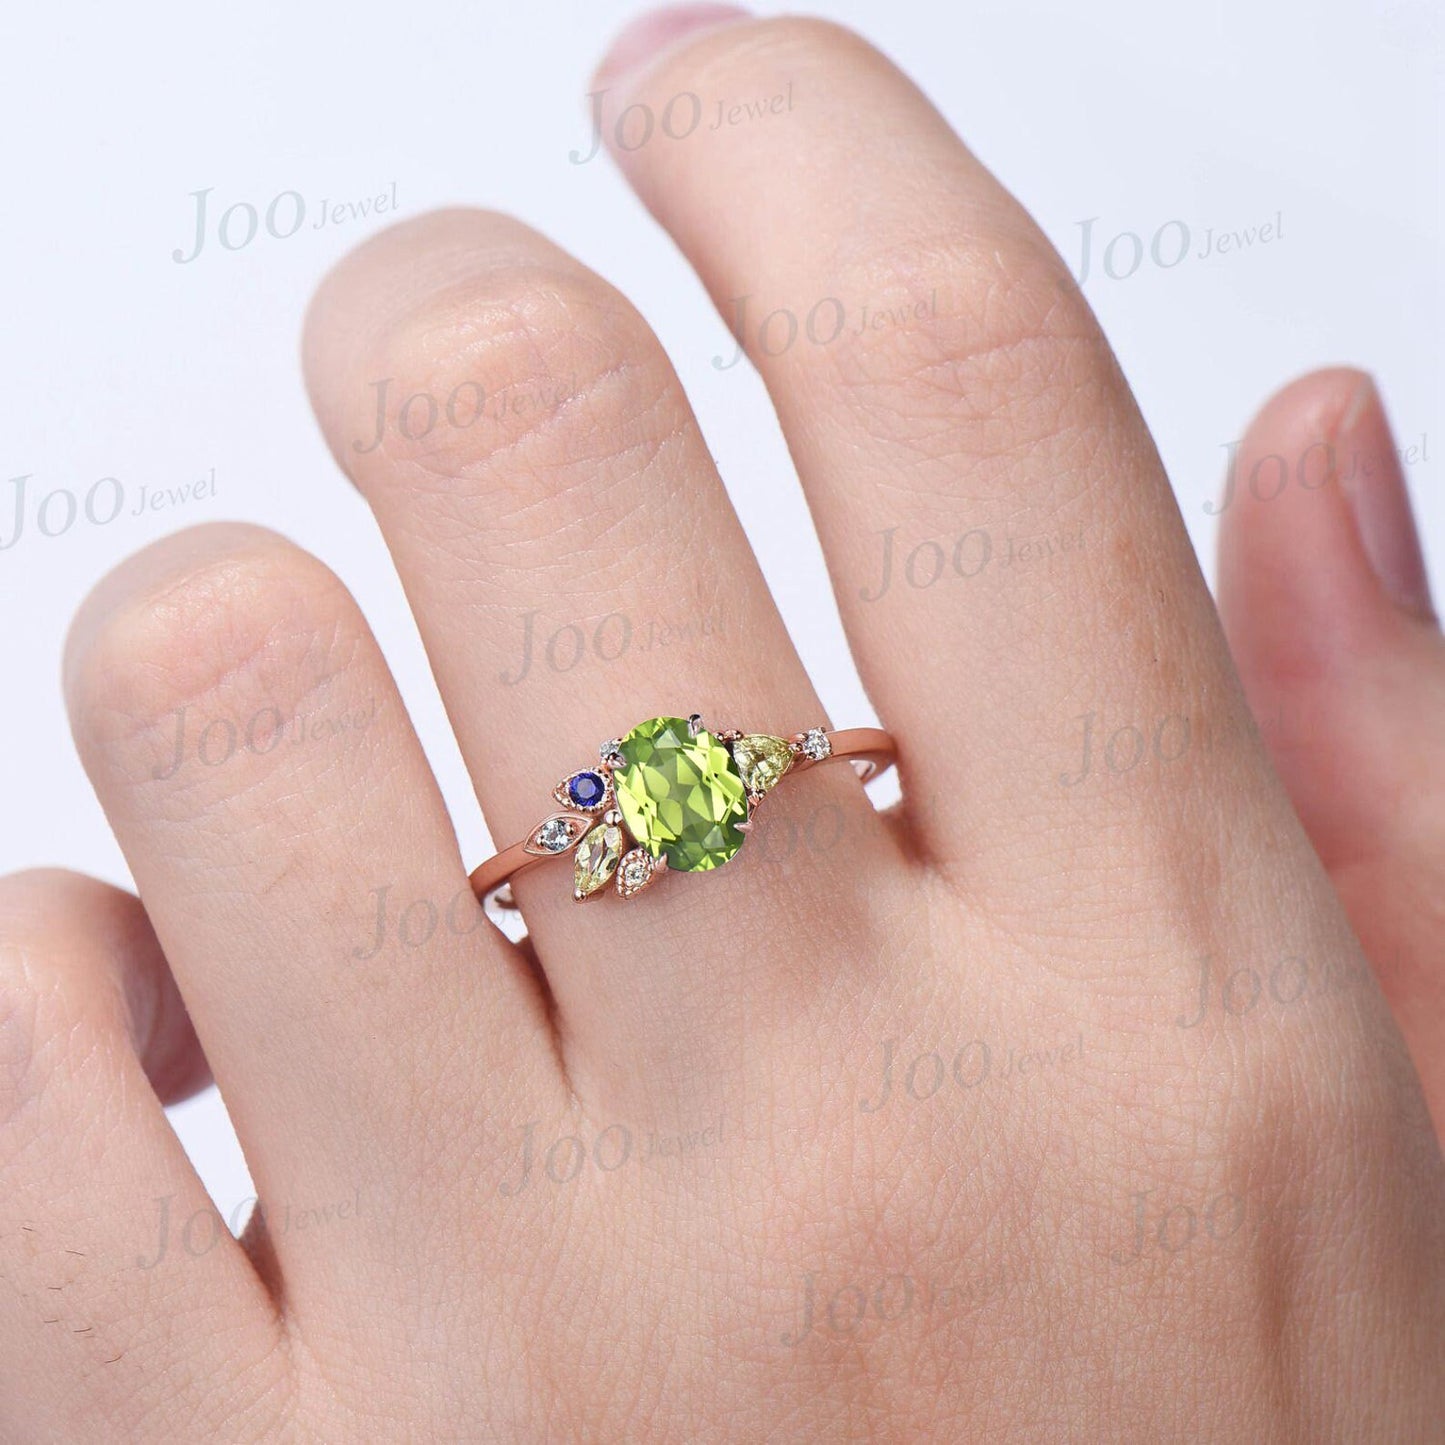 1.5ct Oval Genuine Green Peridot Engagement Ring 10K Rose Gold August Birthstone Cluster Wedding Ring Personalized Anniversary/Birthday Gift